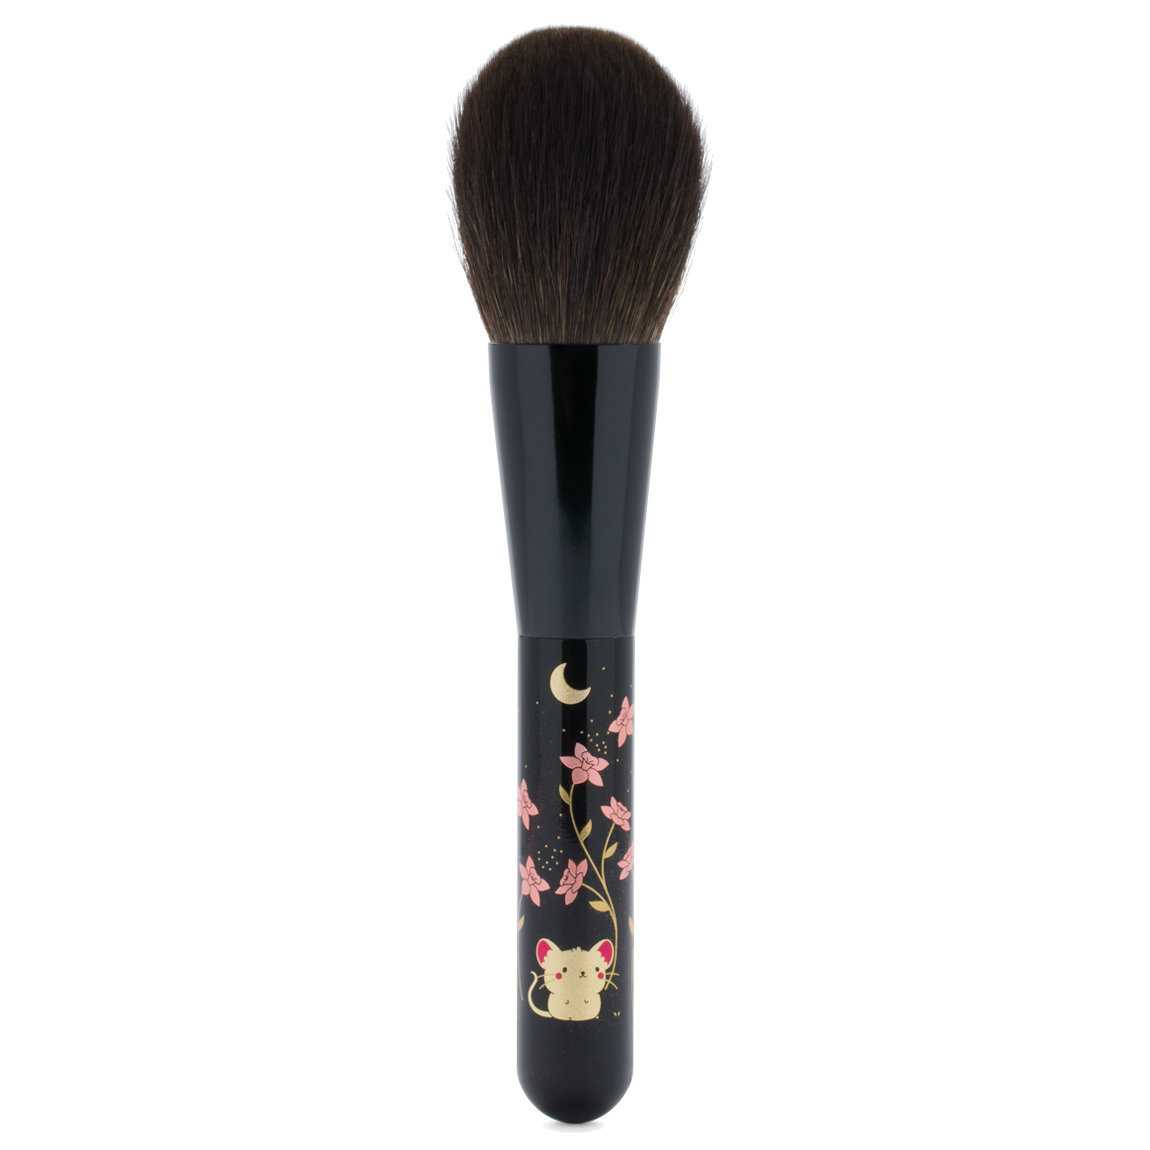 Beautylish Presents The Lunar New Year Brush Year of the Rat alternative view 1 - product swatch.